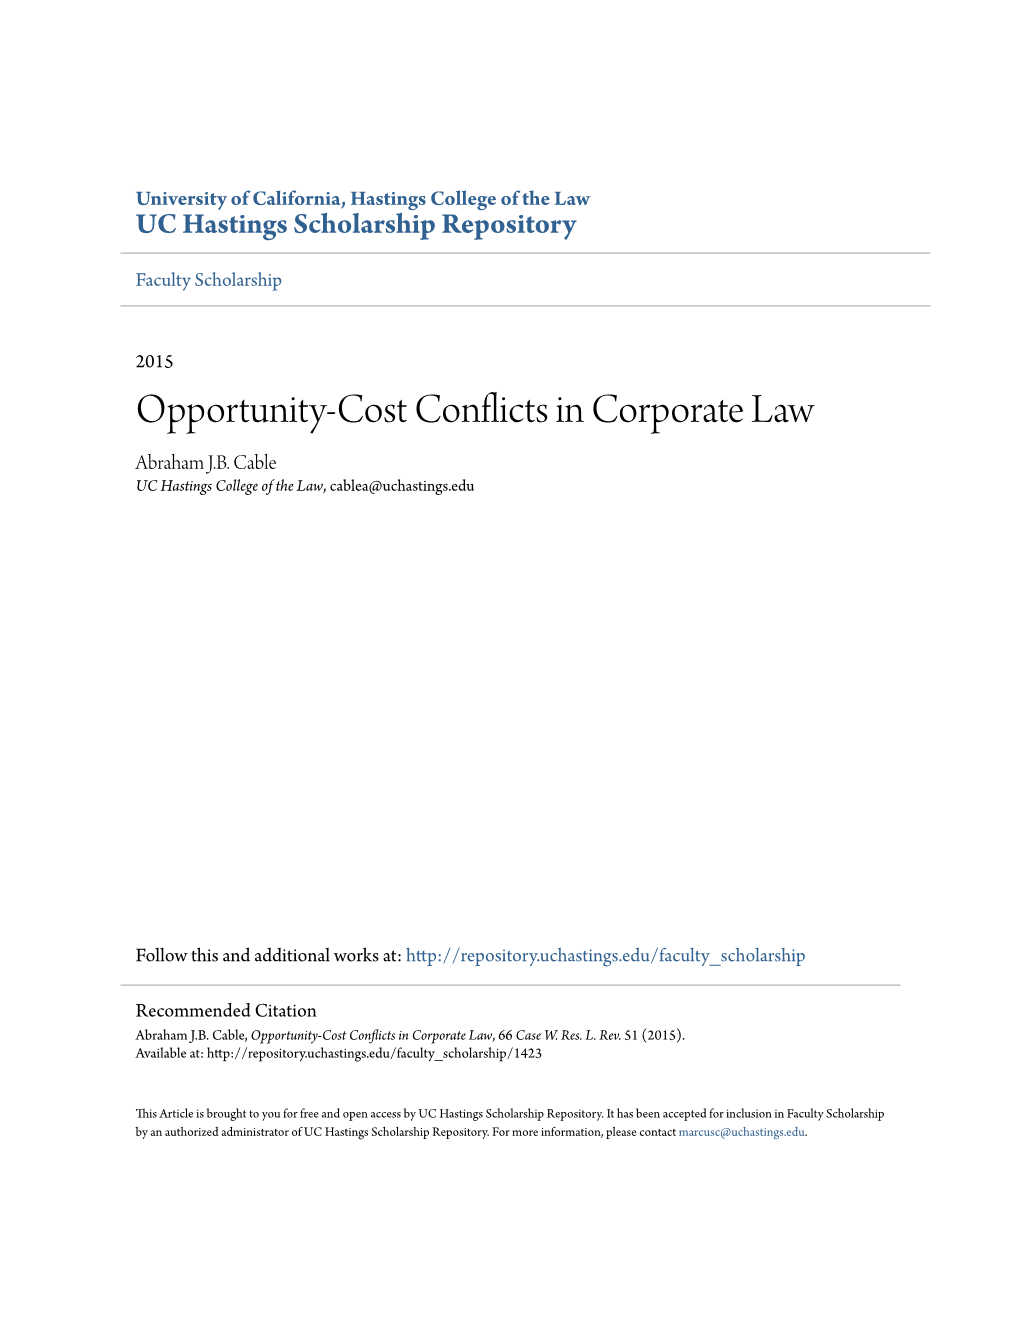 Opportunity-Cost Conflicts in Corporate Law Abraham J.B